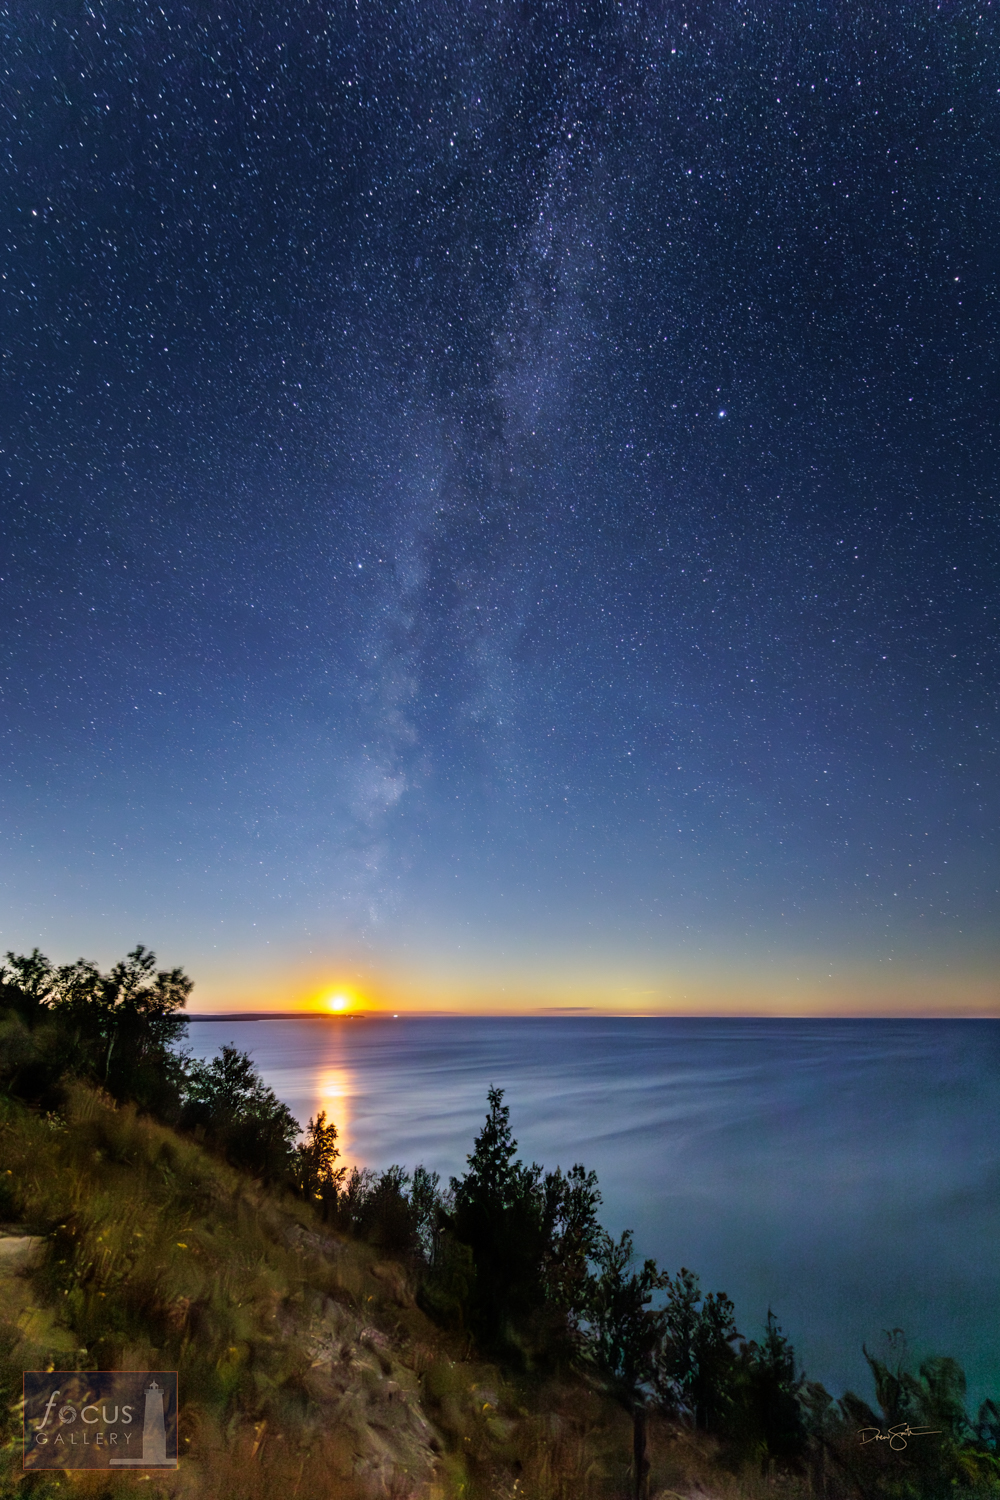 The moon   sets over Platte Bay as the Milky Way and a sky full of stars shines over   Lake Michigan.